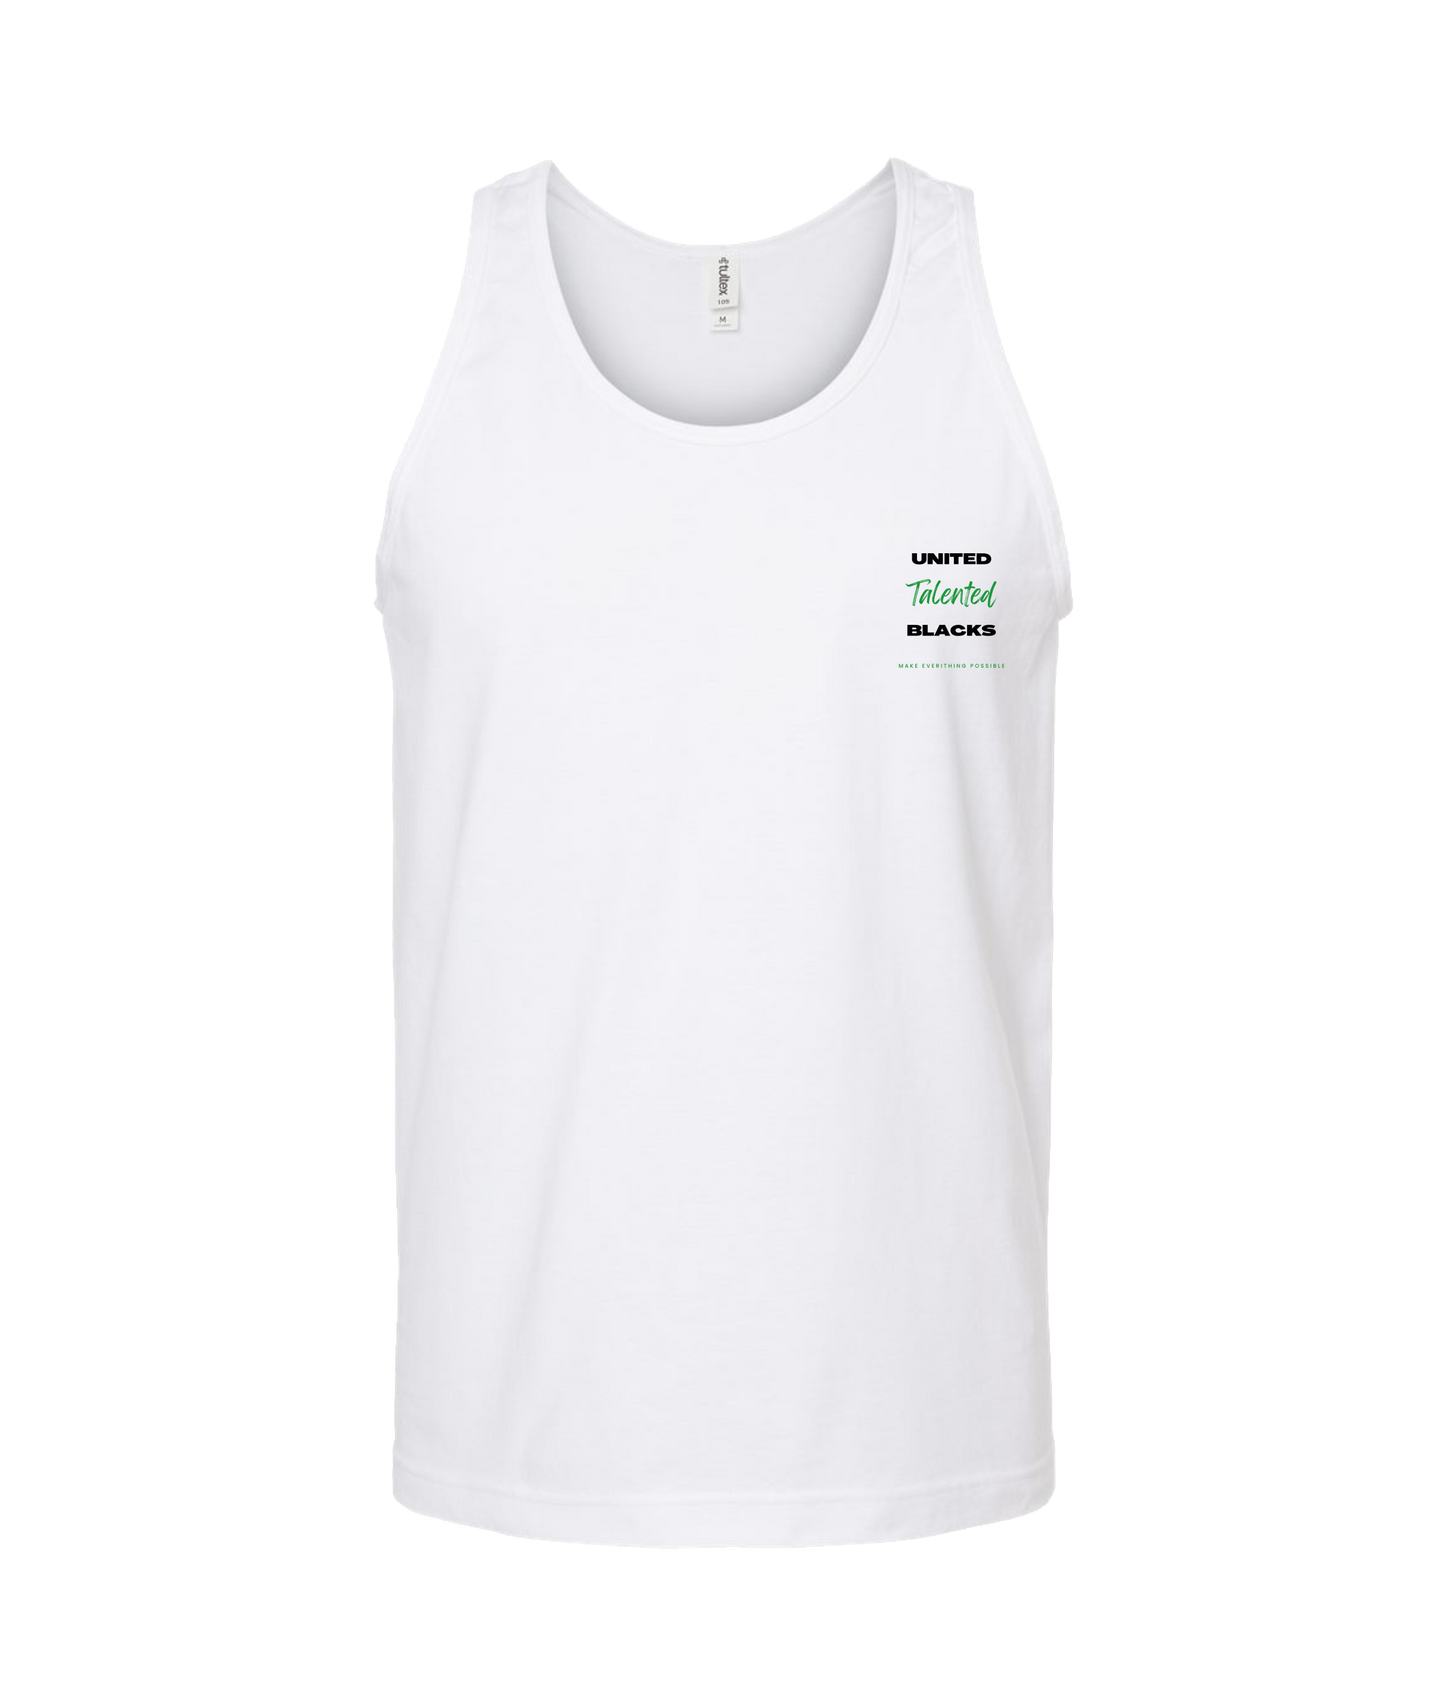 Talented Black - MAKE EVERYTHING POSSIBLE - White Tank Top